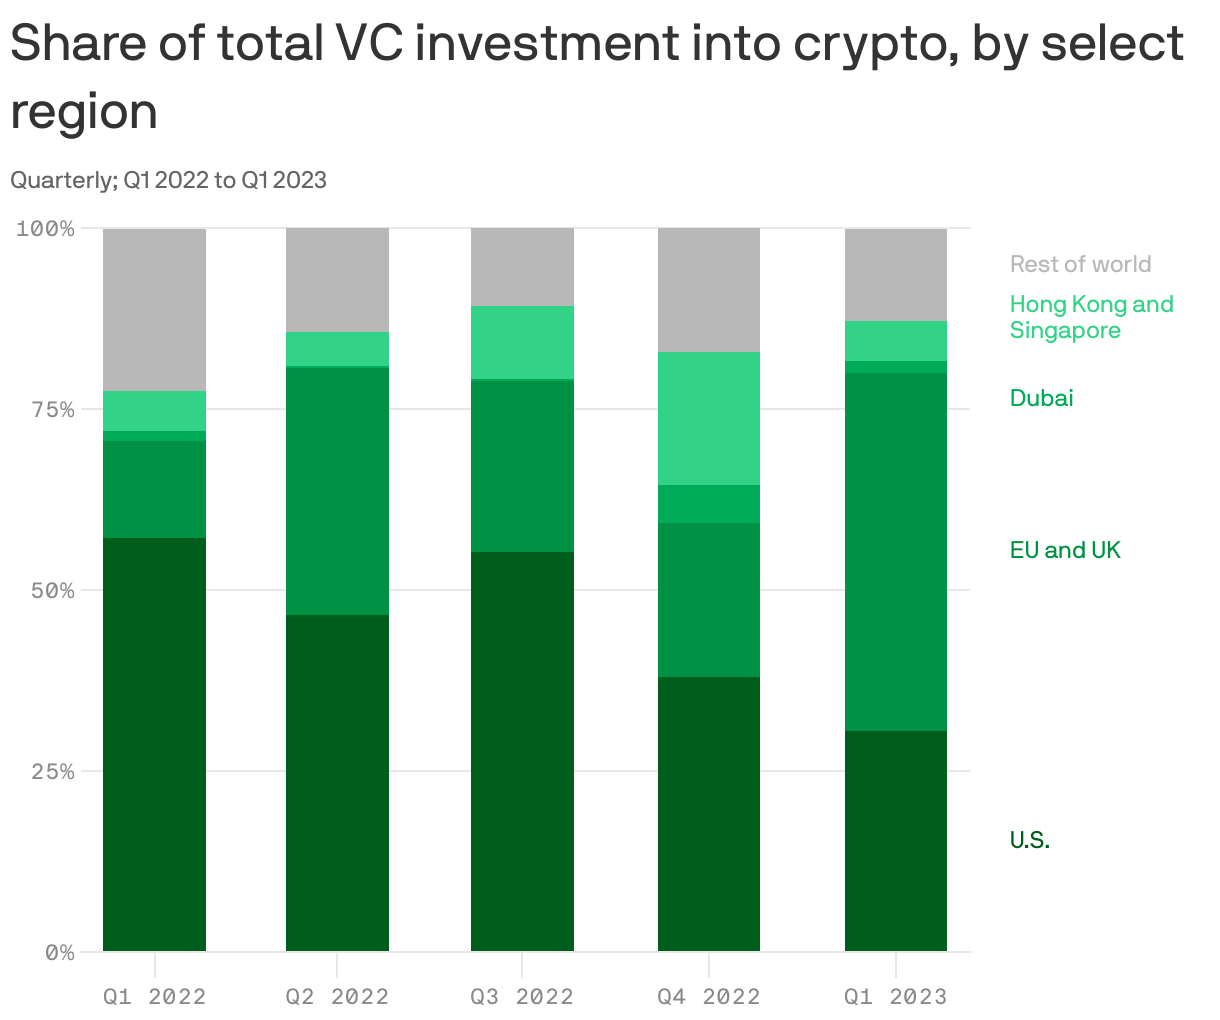 Share of total VC investment into crypto, by select region 